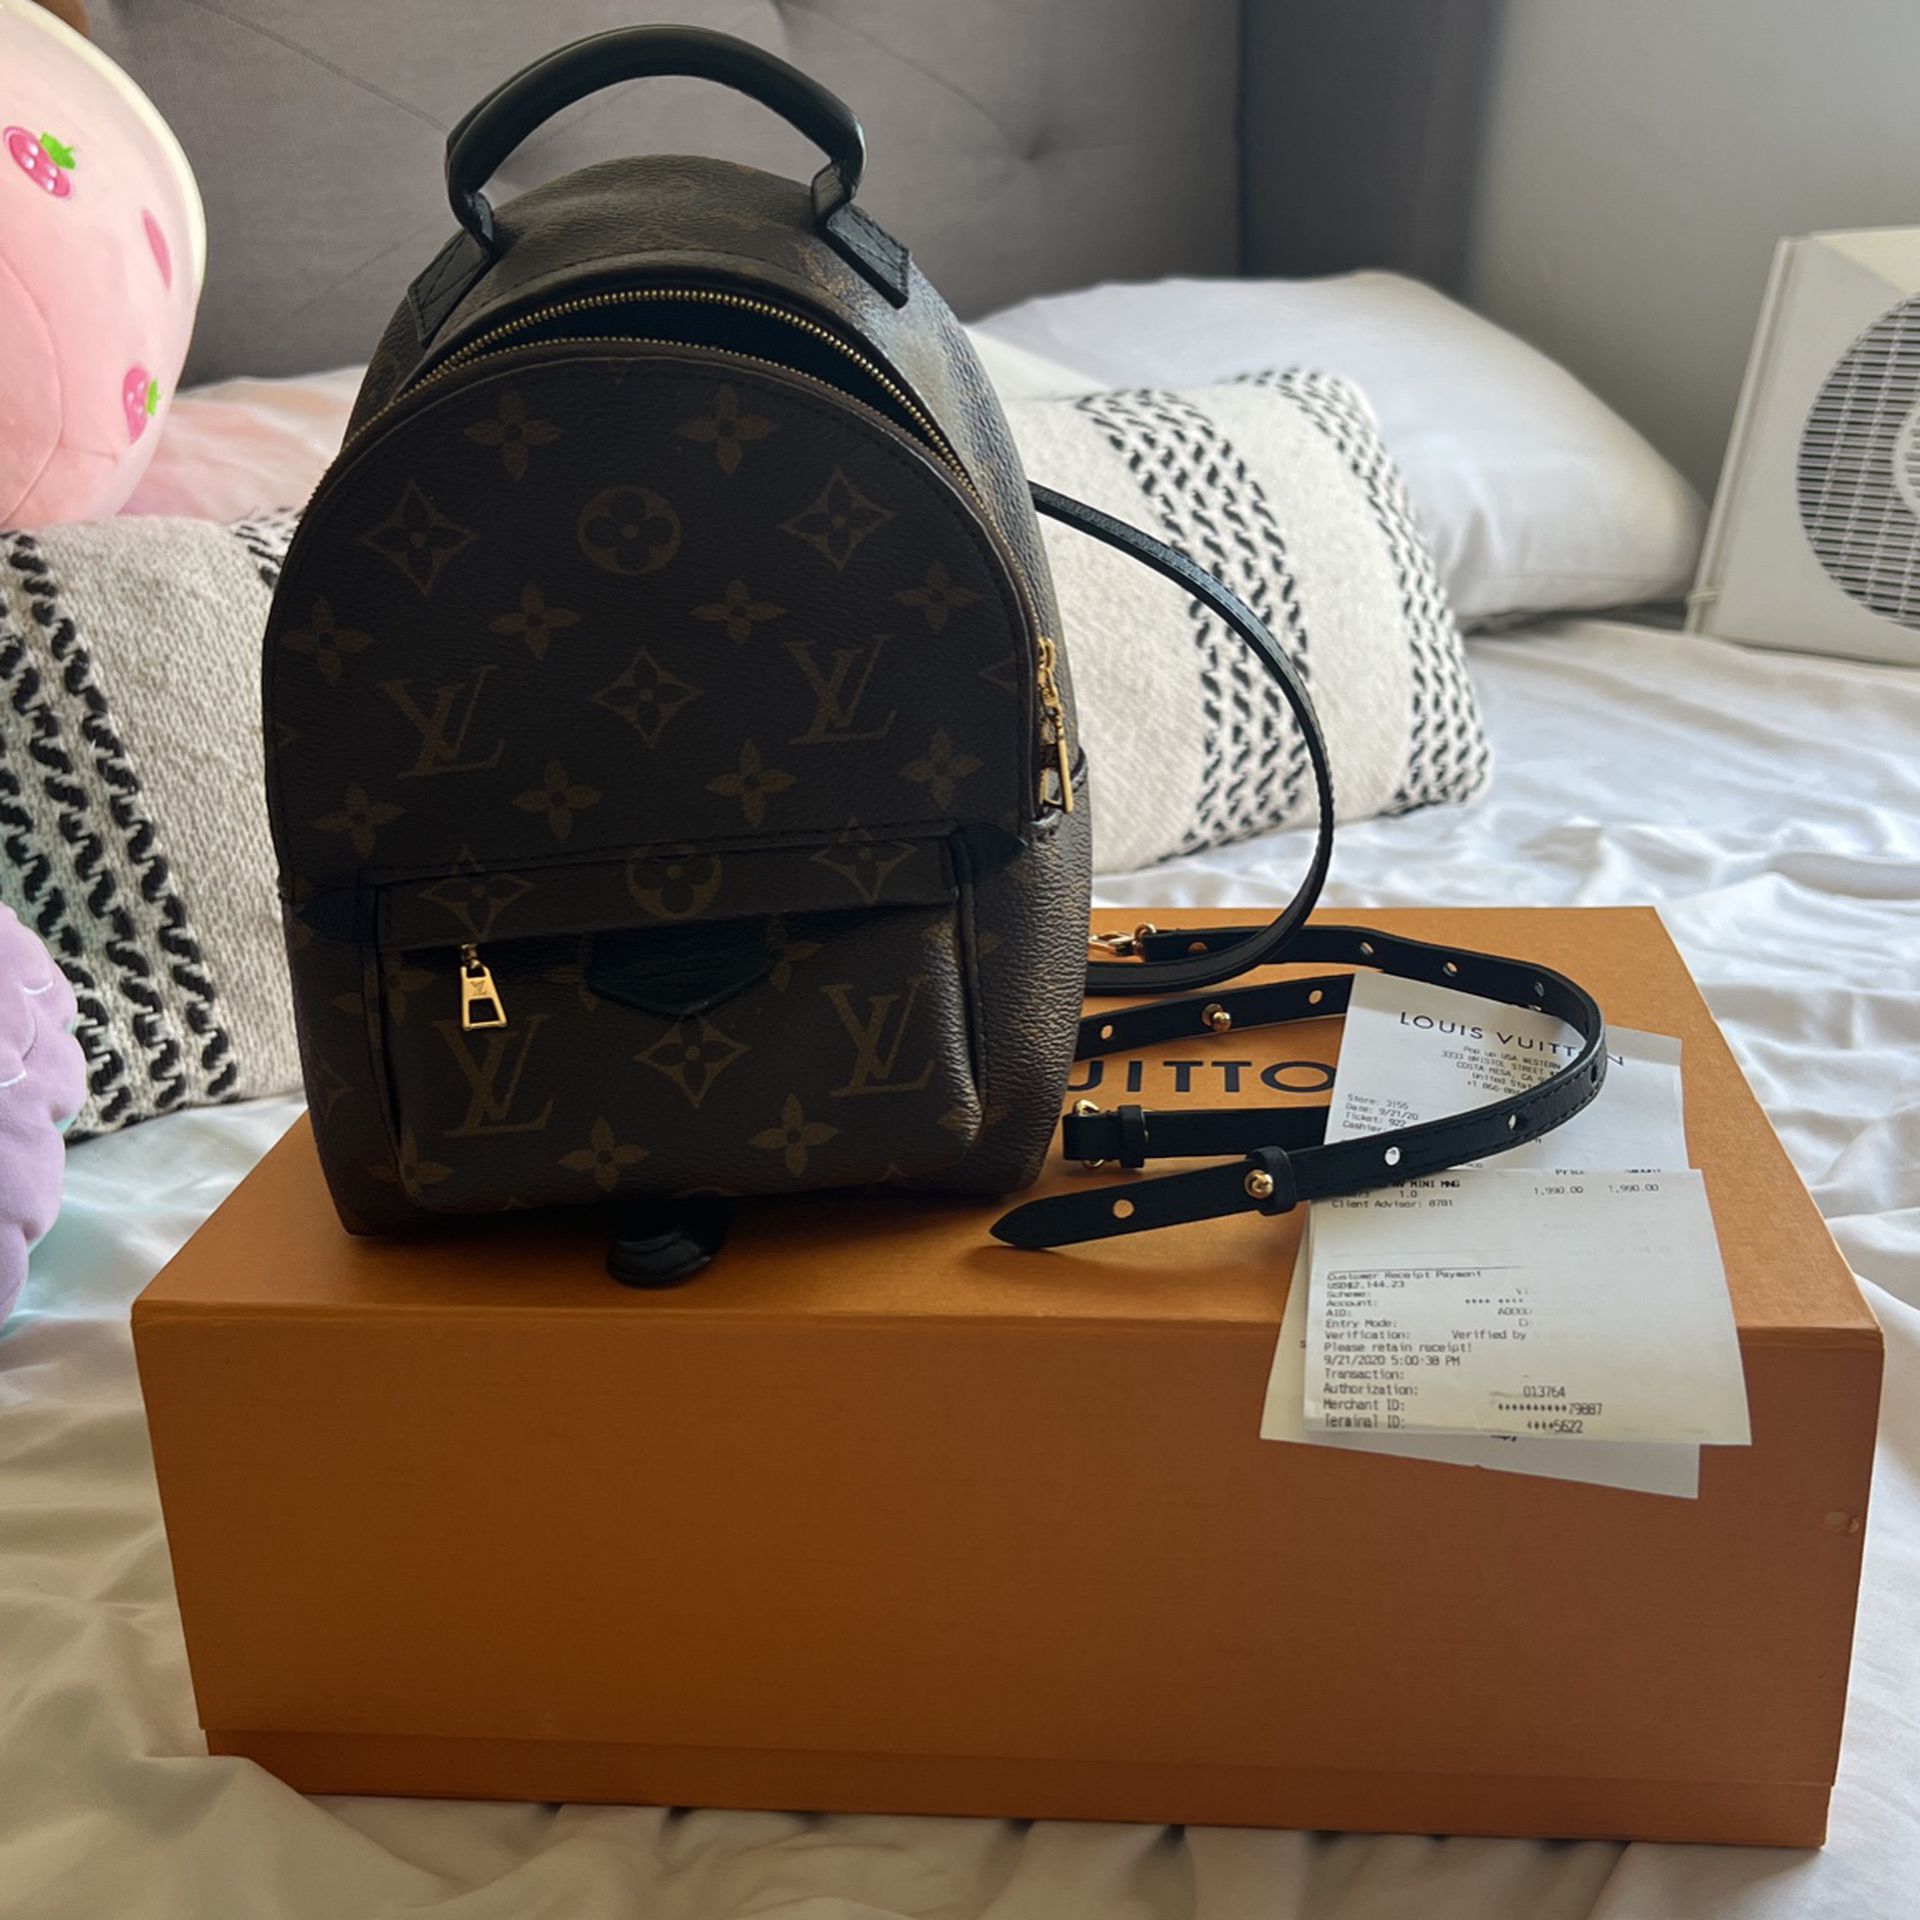 LV Palm Springs Mini M44873 for Sale in San Diego, CA - OfferUp